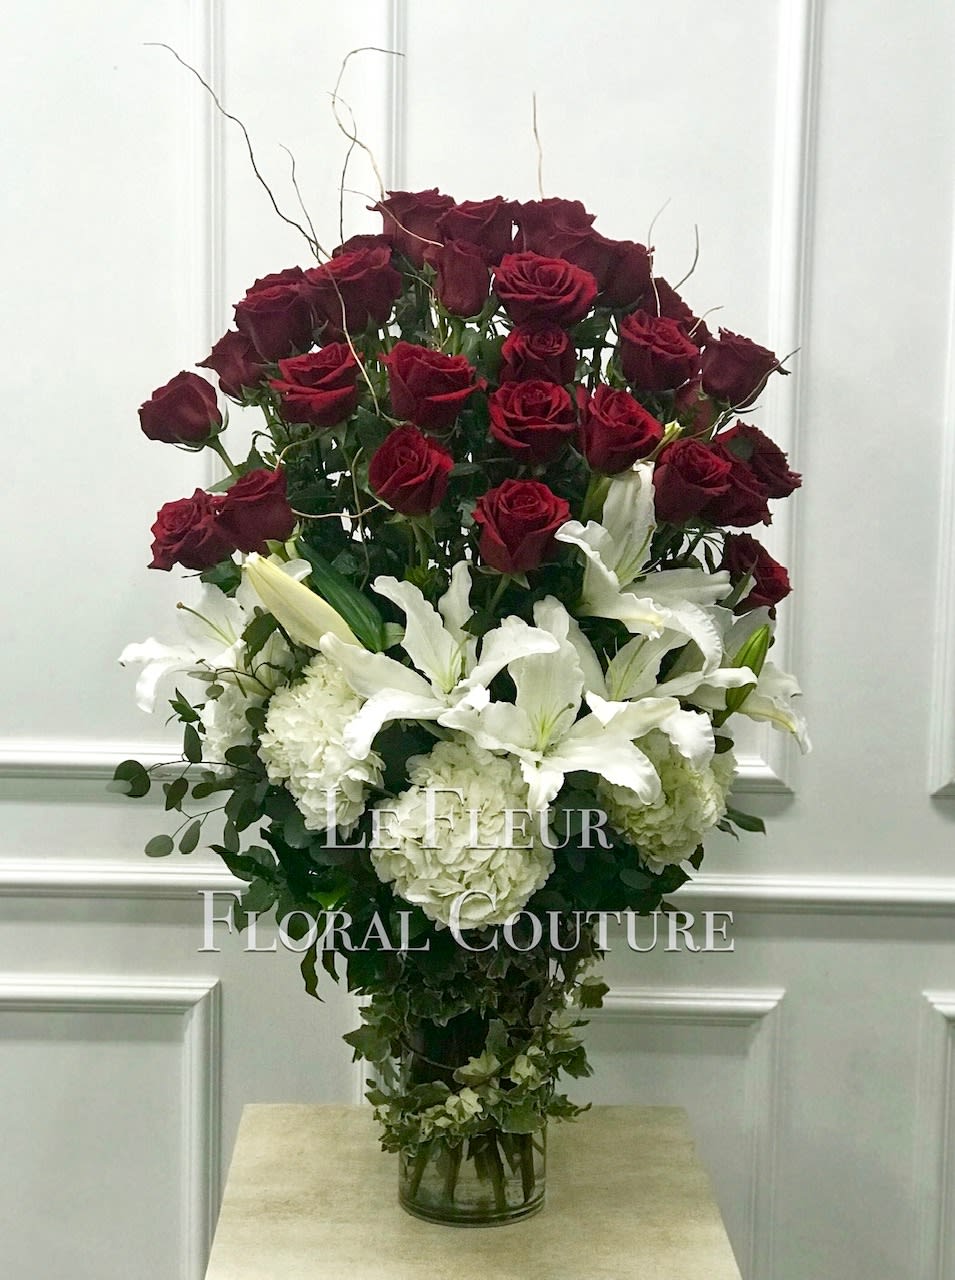 A beautiful and towering floral arrangement filled with three dozen red roses